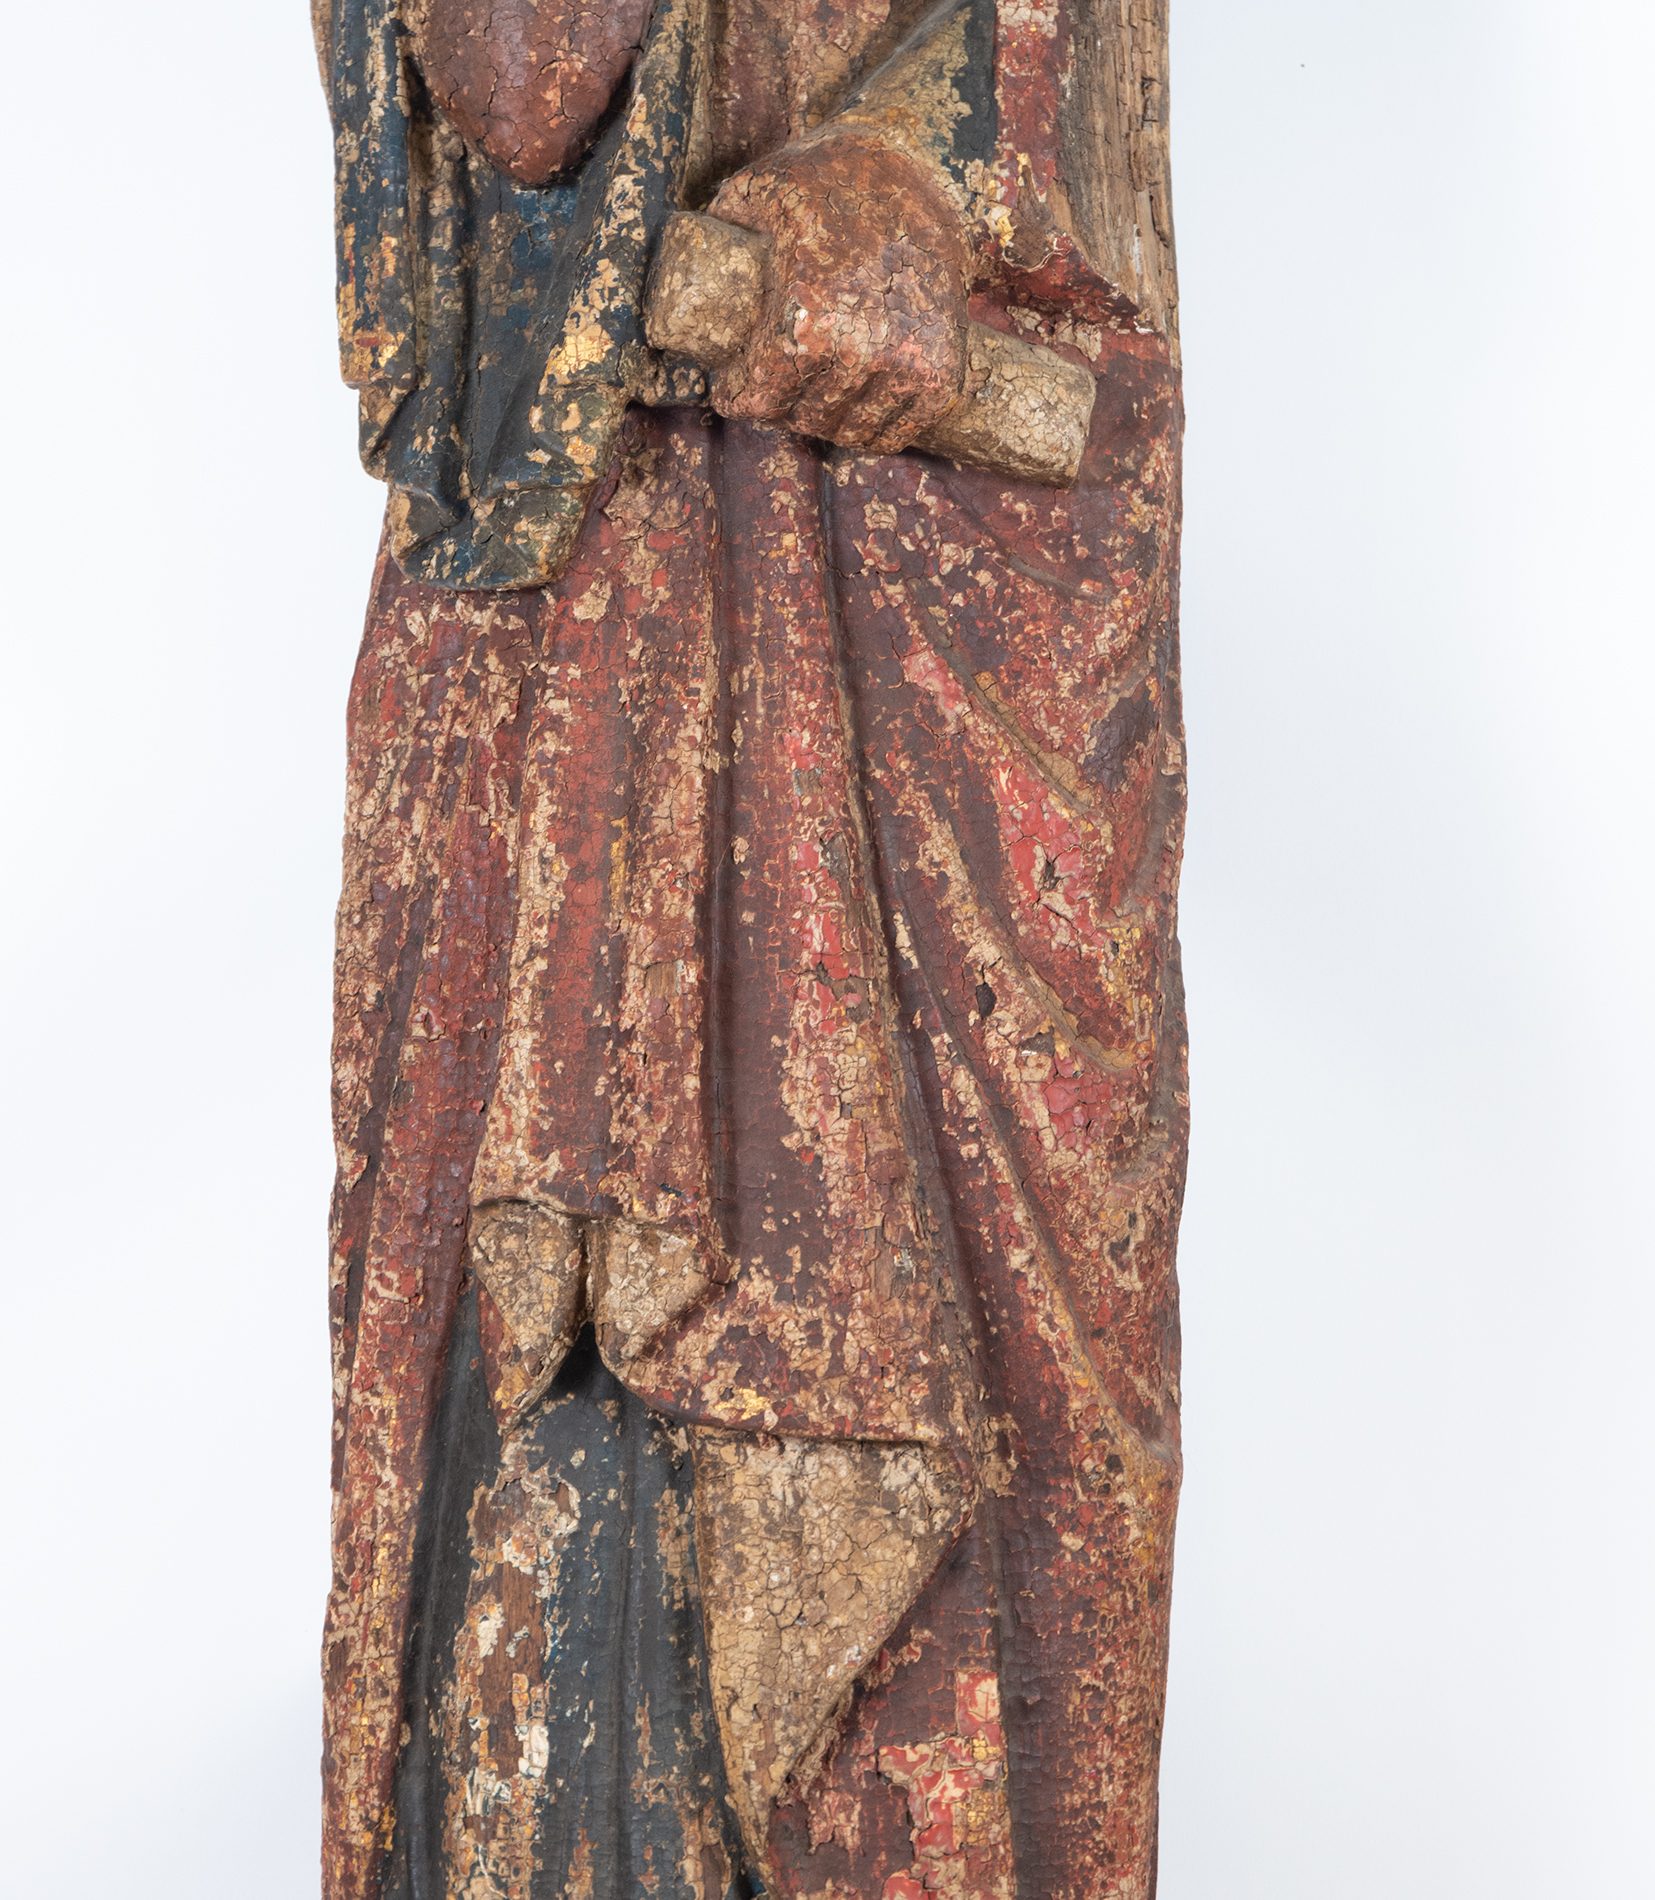 Pair of Large Romanesque Carvings representing Mary and Saint John the Evangelist, Romanesque School - Image 4 of 22